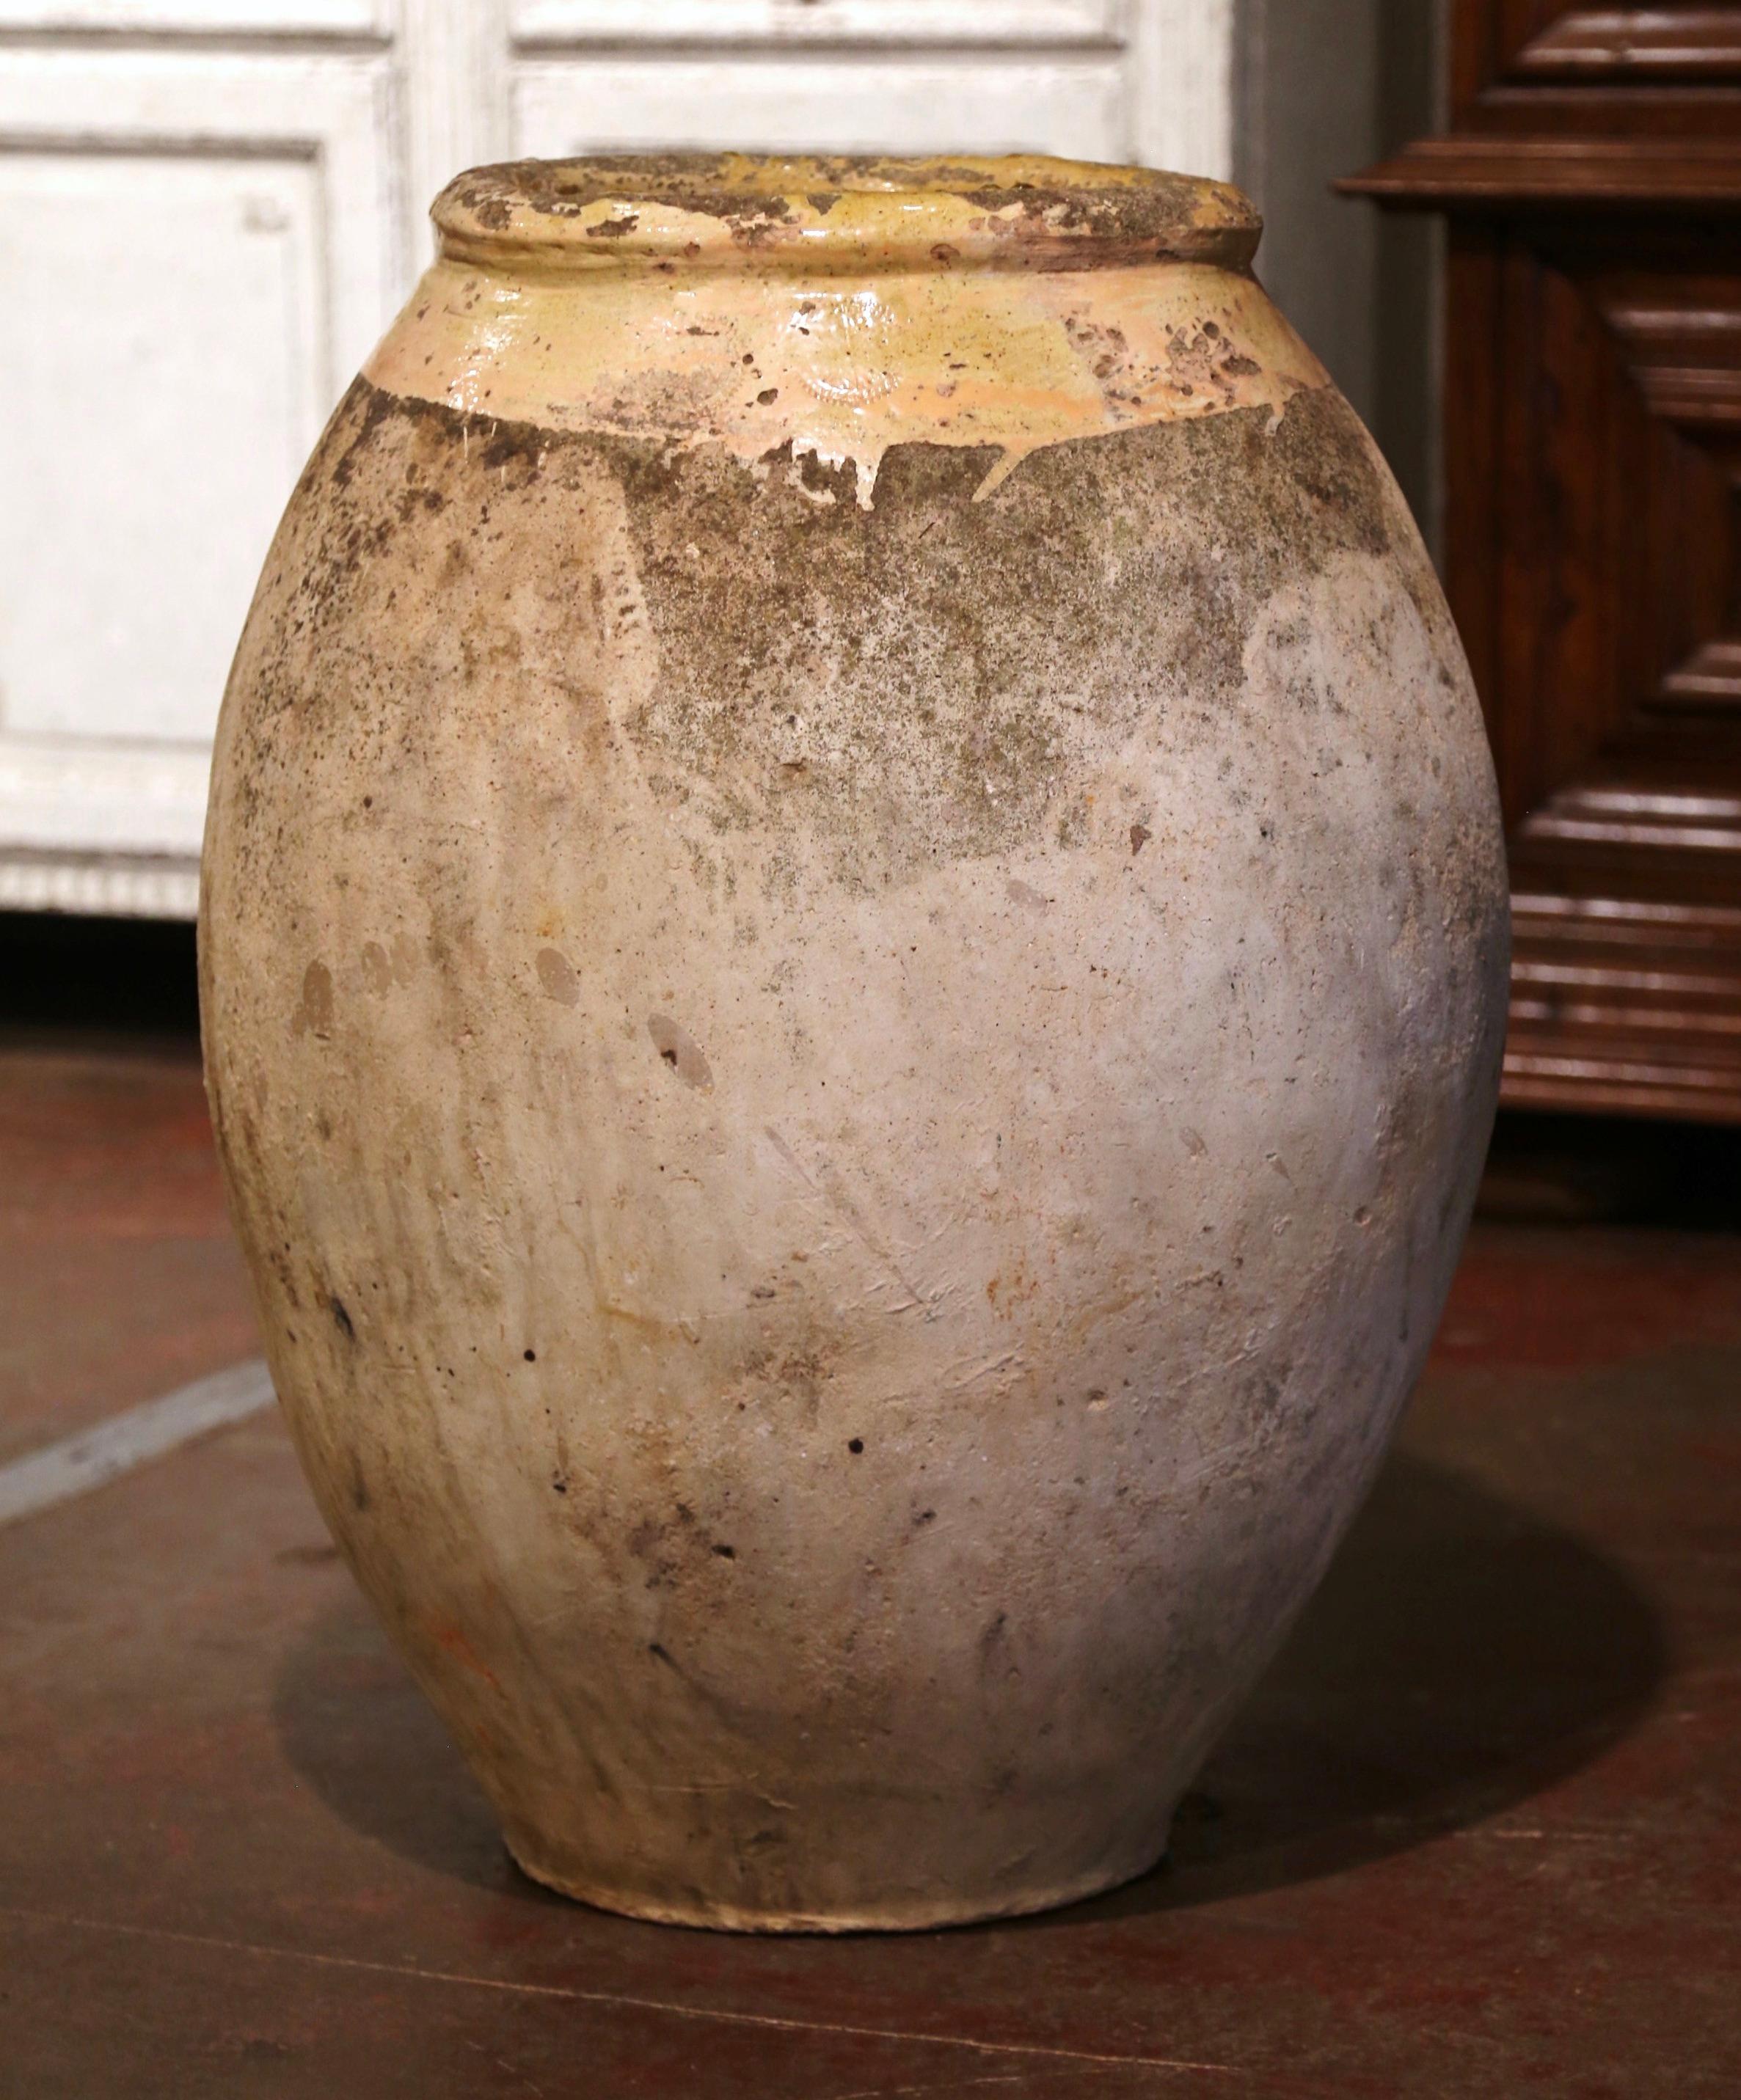 This large, antique earthenware olive jar was created in Southern France, circa 1760. Made of blond clay and neutral in color, the terracotta vase has a traditional round shape. The rustic, time-worn pot features a yellow glaze around the neck and